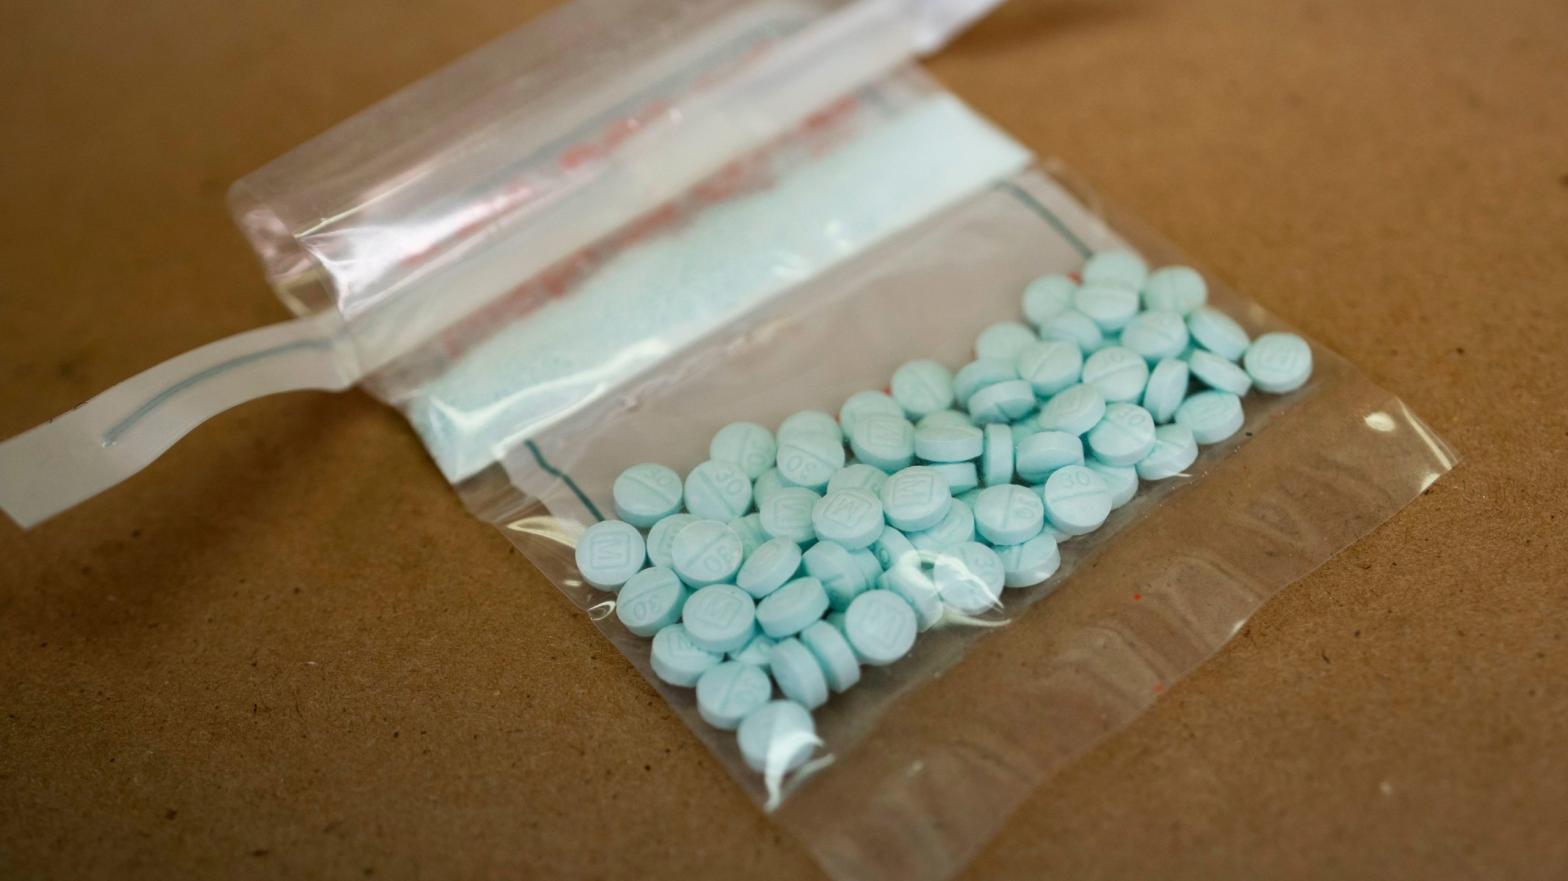 Tablets believed to be laced with fentanyl are displayed at the Drug Enforcement Administration Northeast Regional Laboratory on October 8, 2019 in New York. (Photo: Don Emmert, Getty Images)